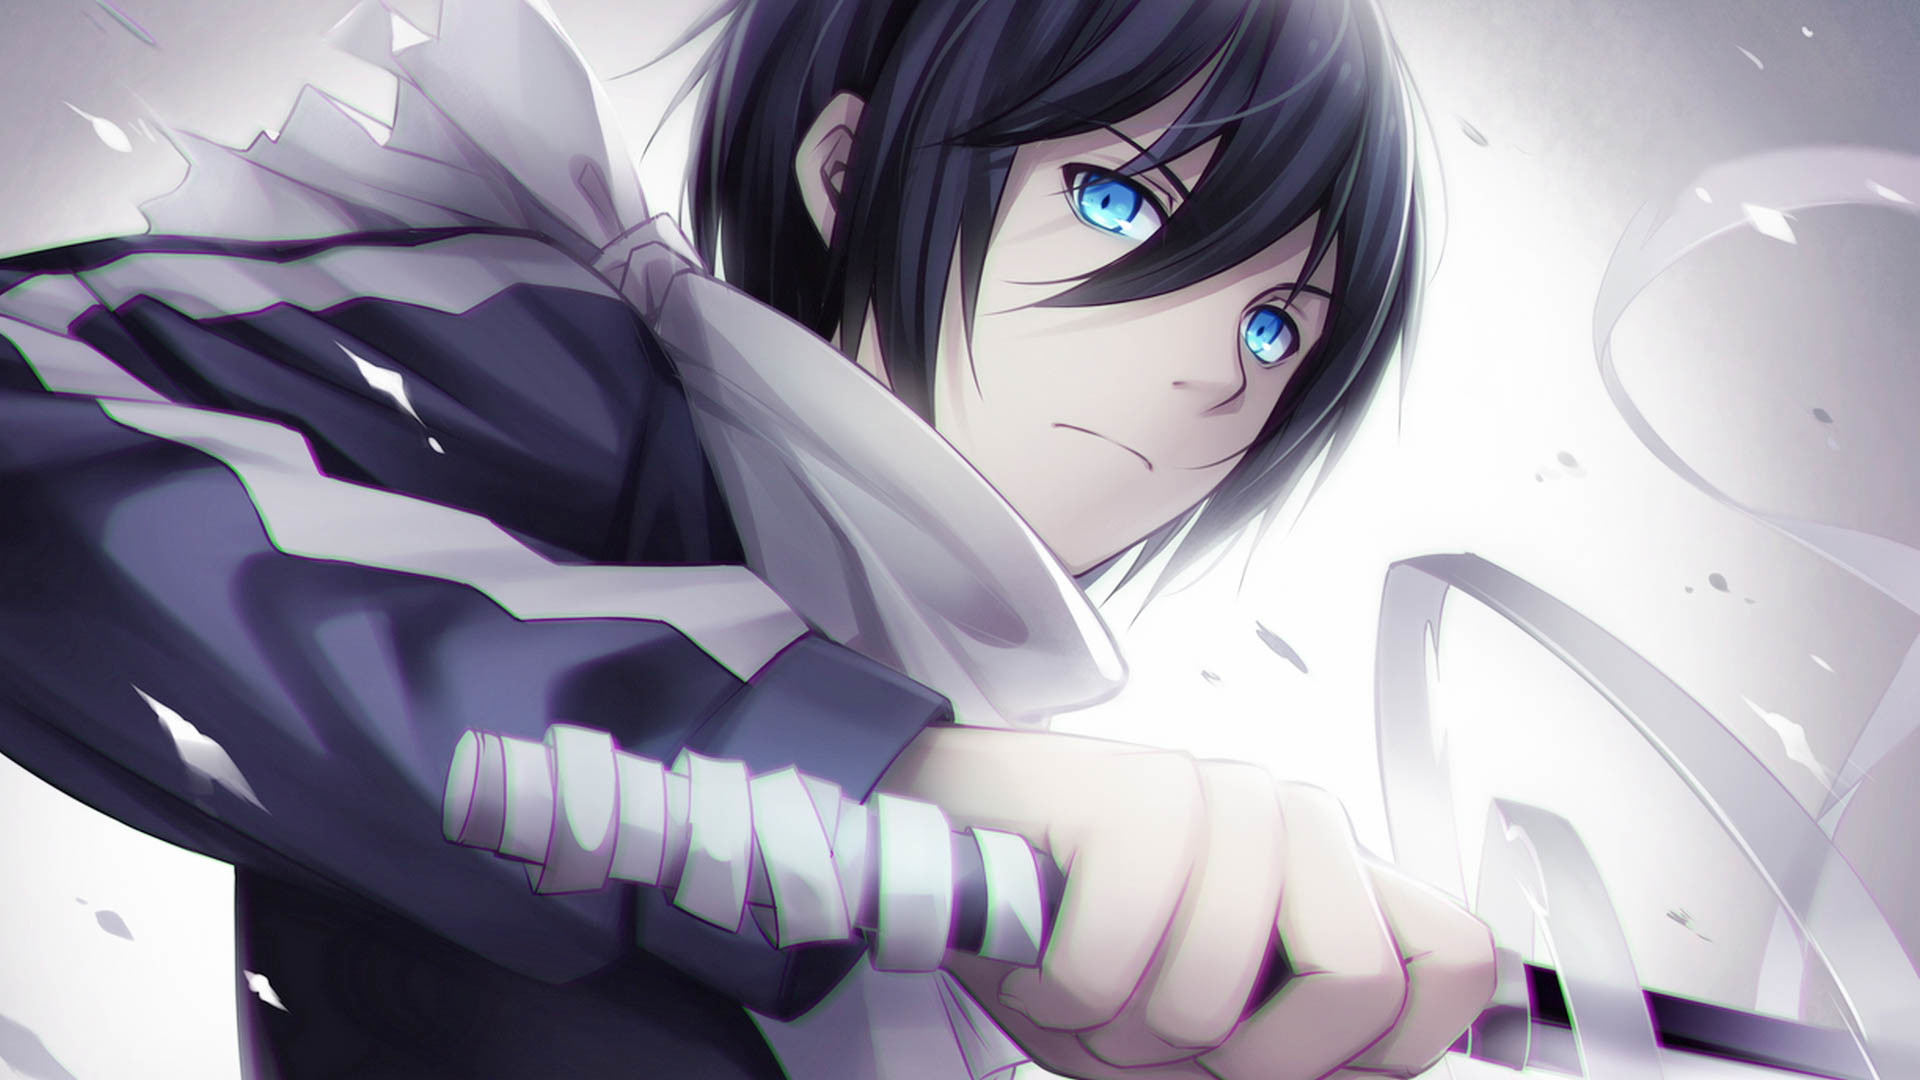 Anime Noragami Amazing Wallpapers And Images In High Quality